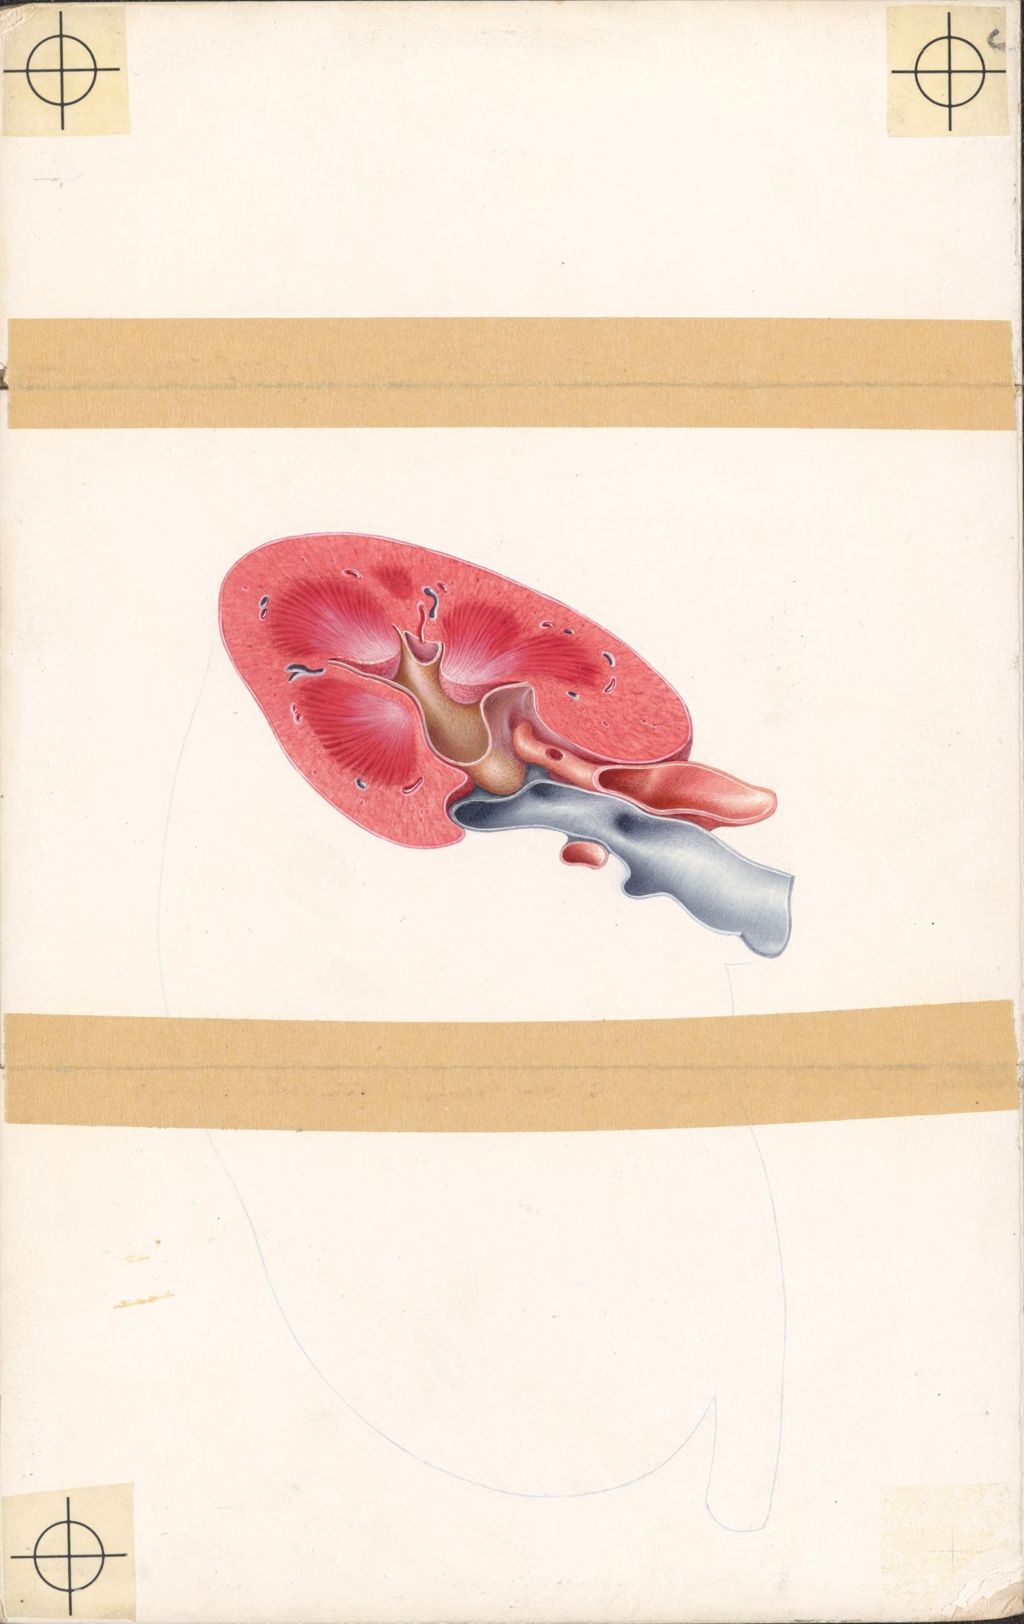 Section of the kidney